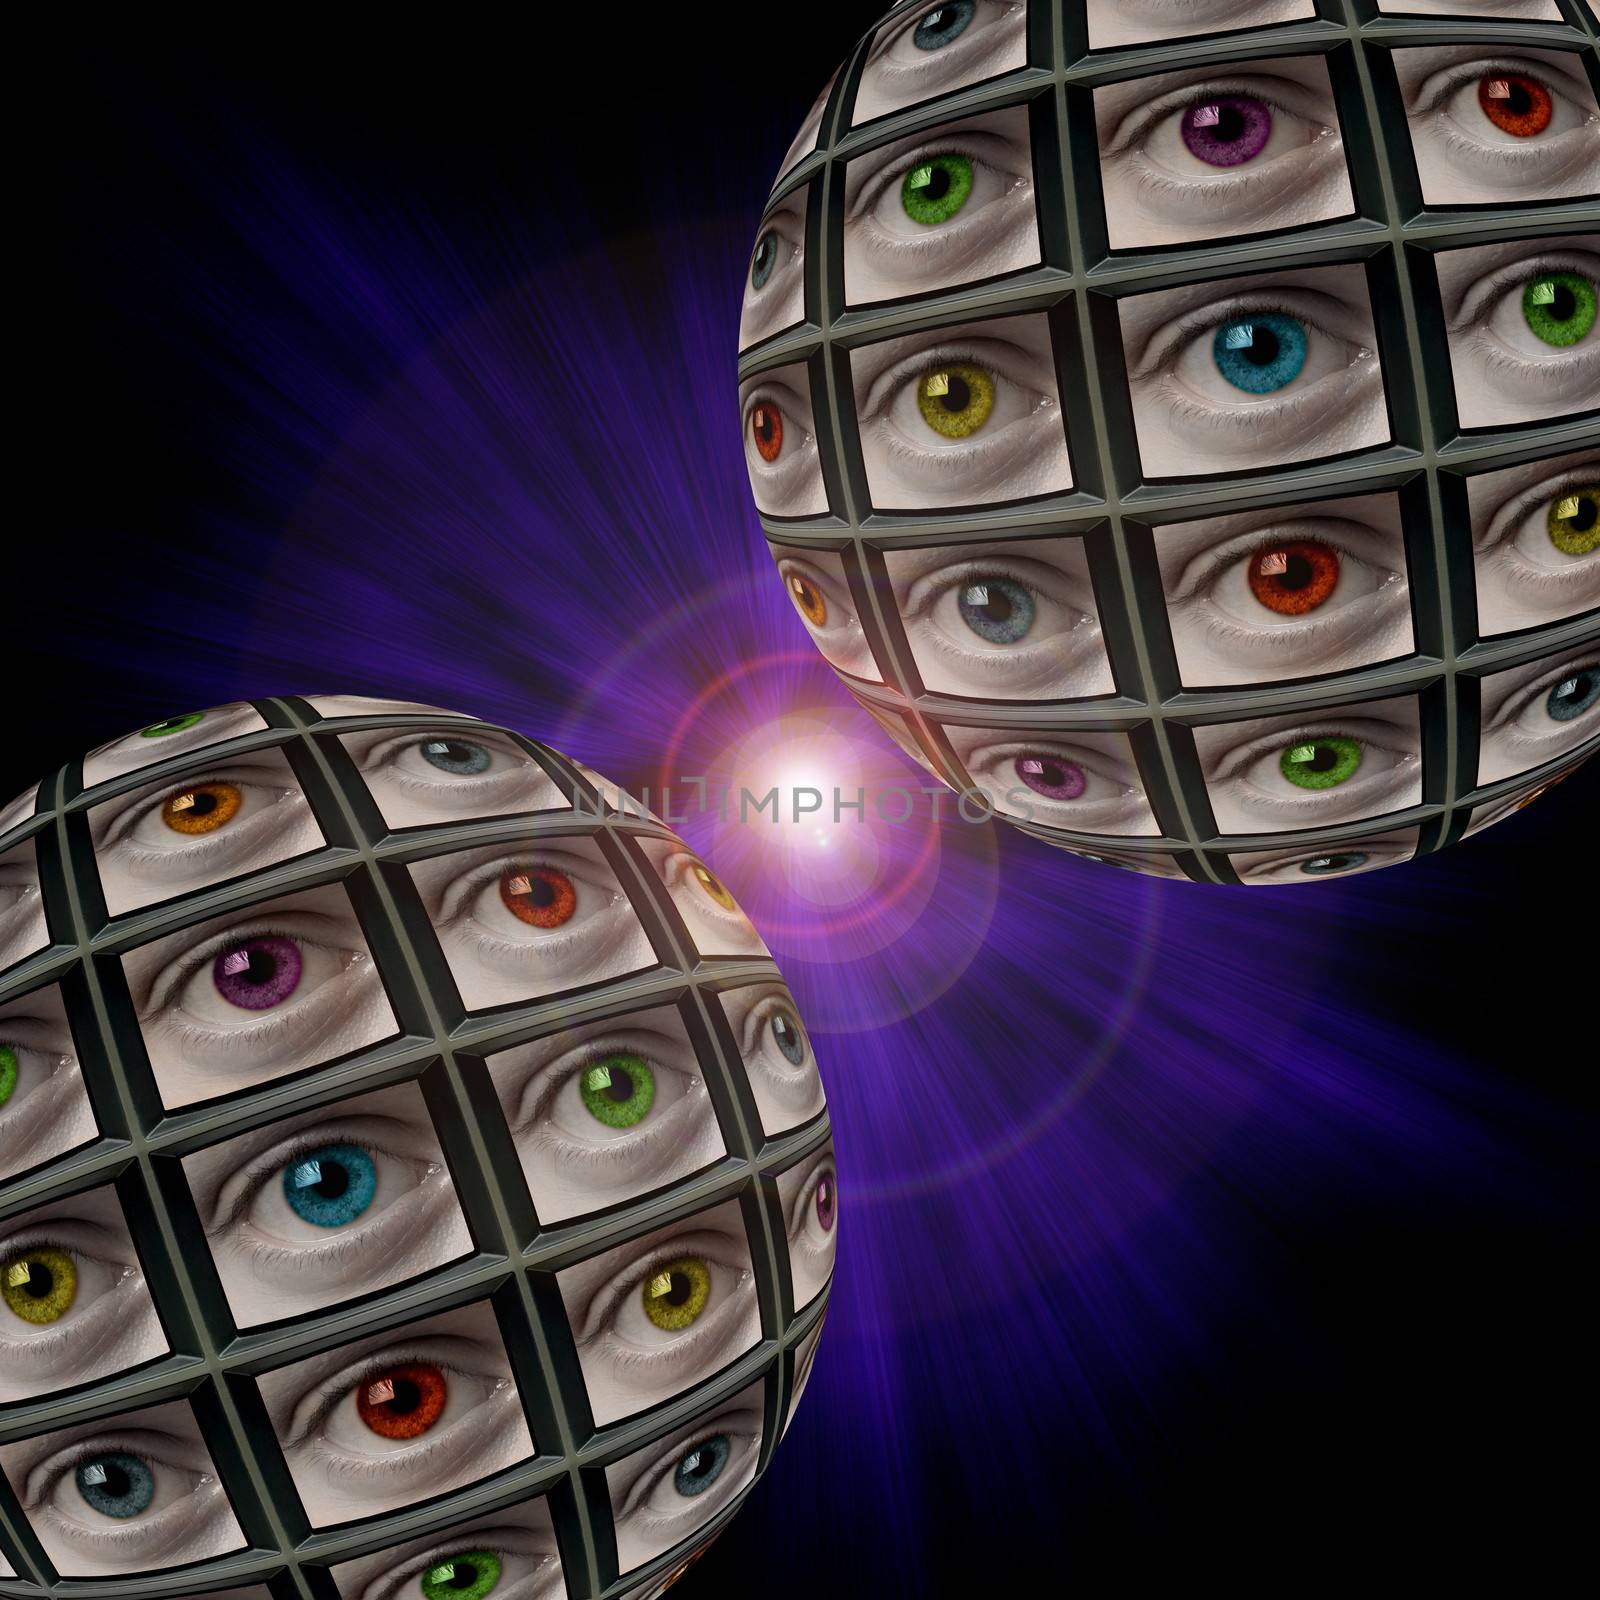 Two sphere of video screens showing multi-colored eyes by Balefire9